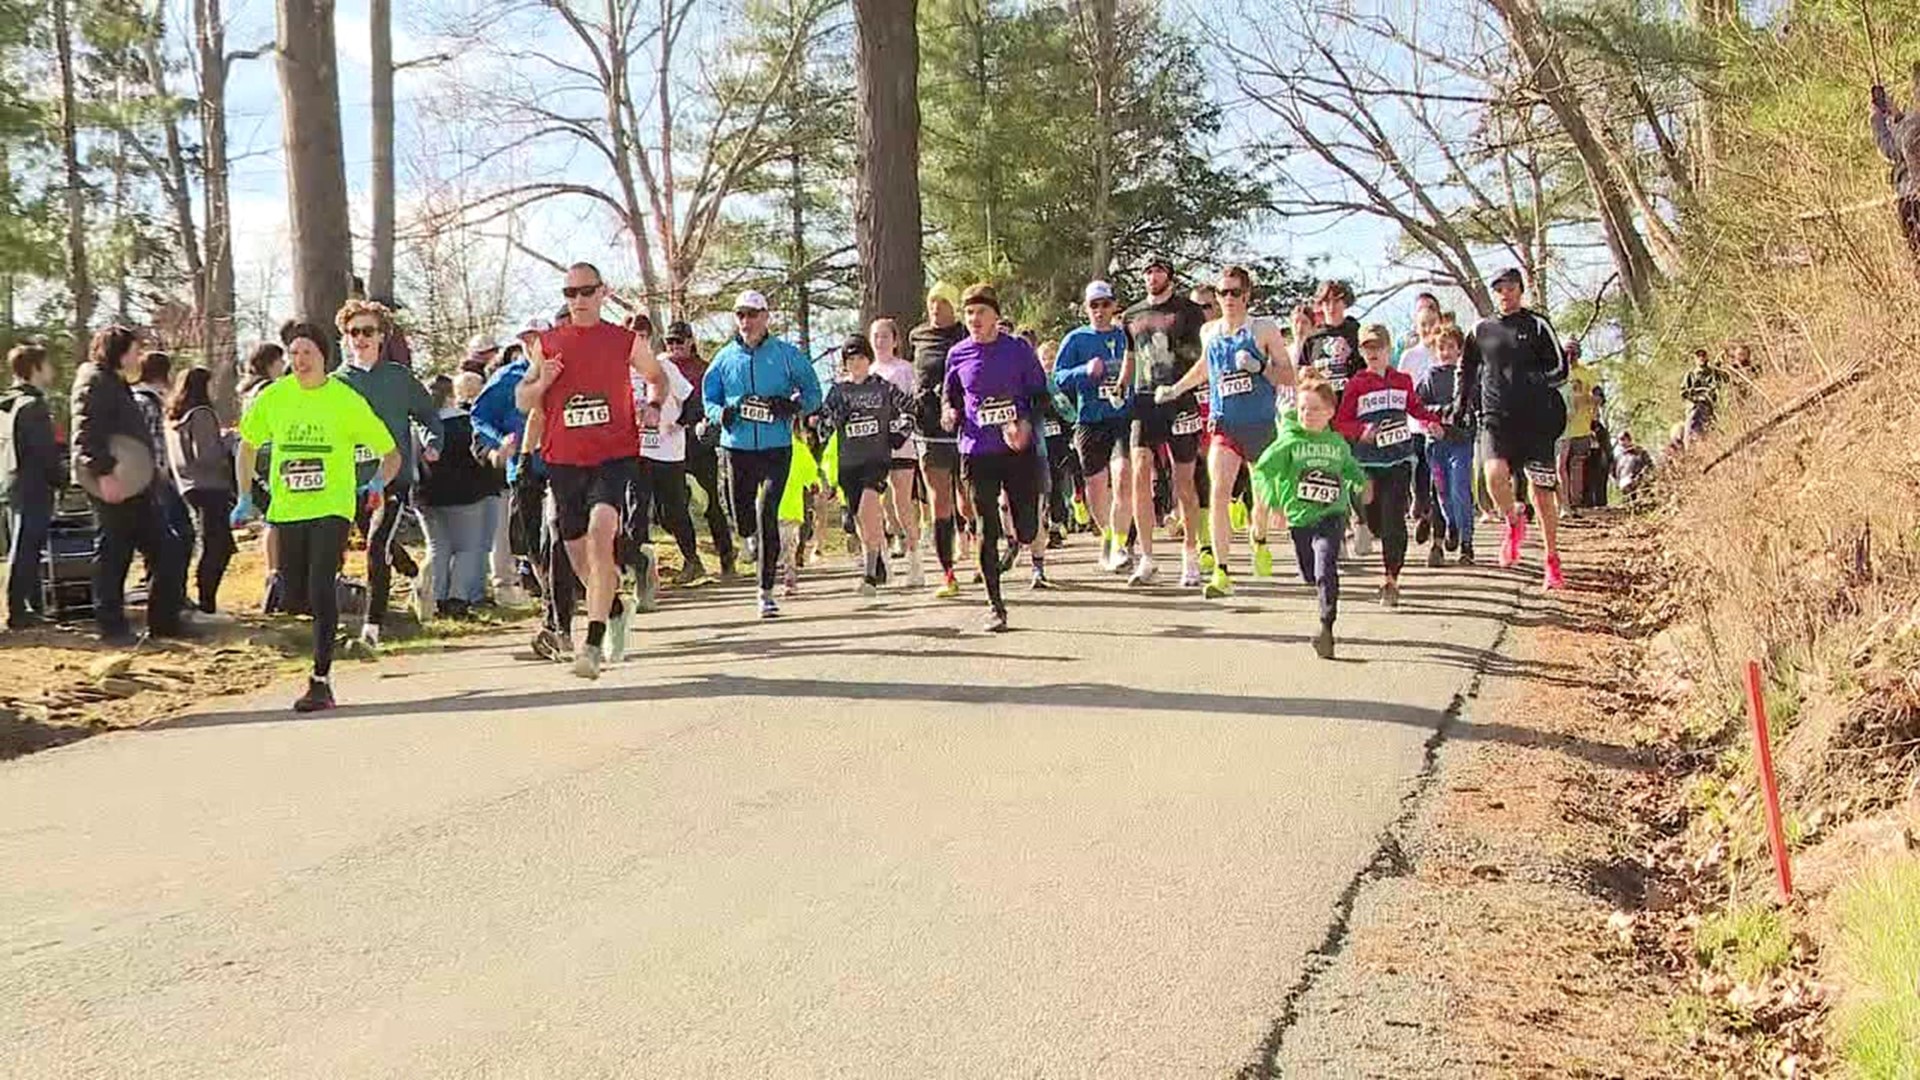 For seven years a community in Wyoming County has come together for a charity run to remember one of their own and raise money for pediatric care at Allied Services.